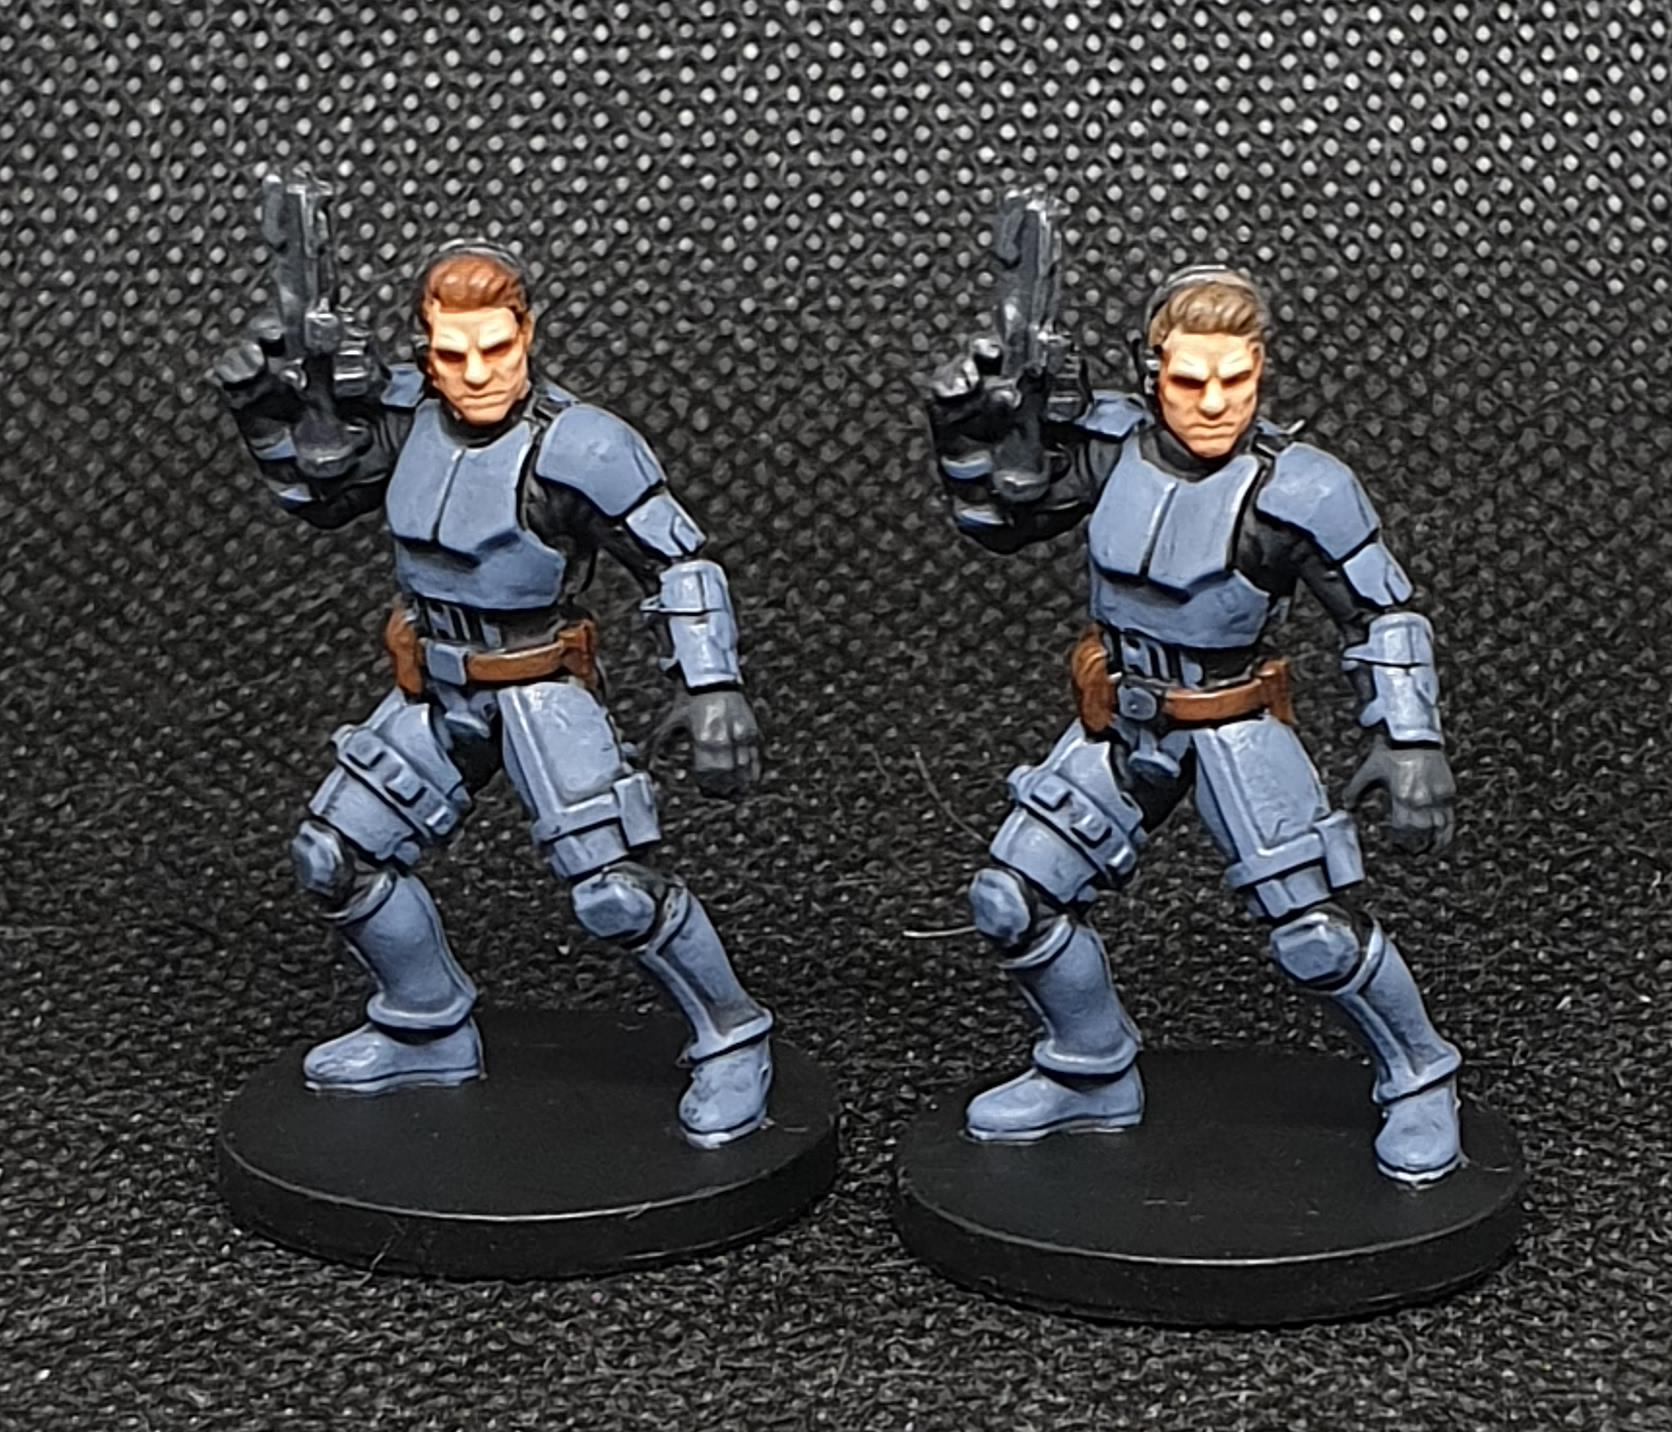 Imperial, Imperial Assault, Star Wars